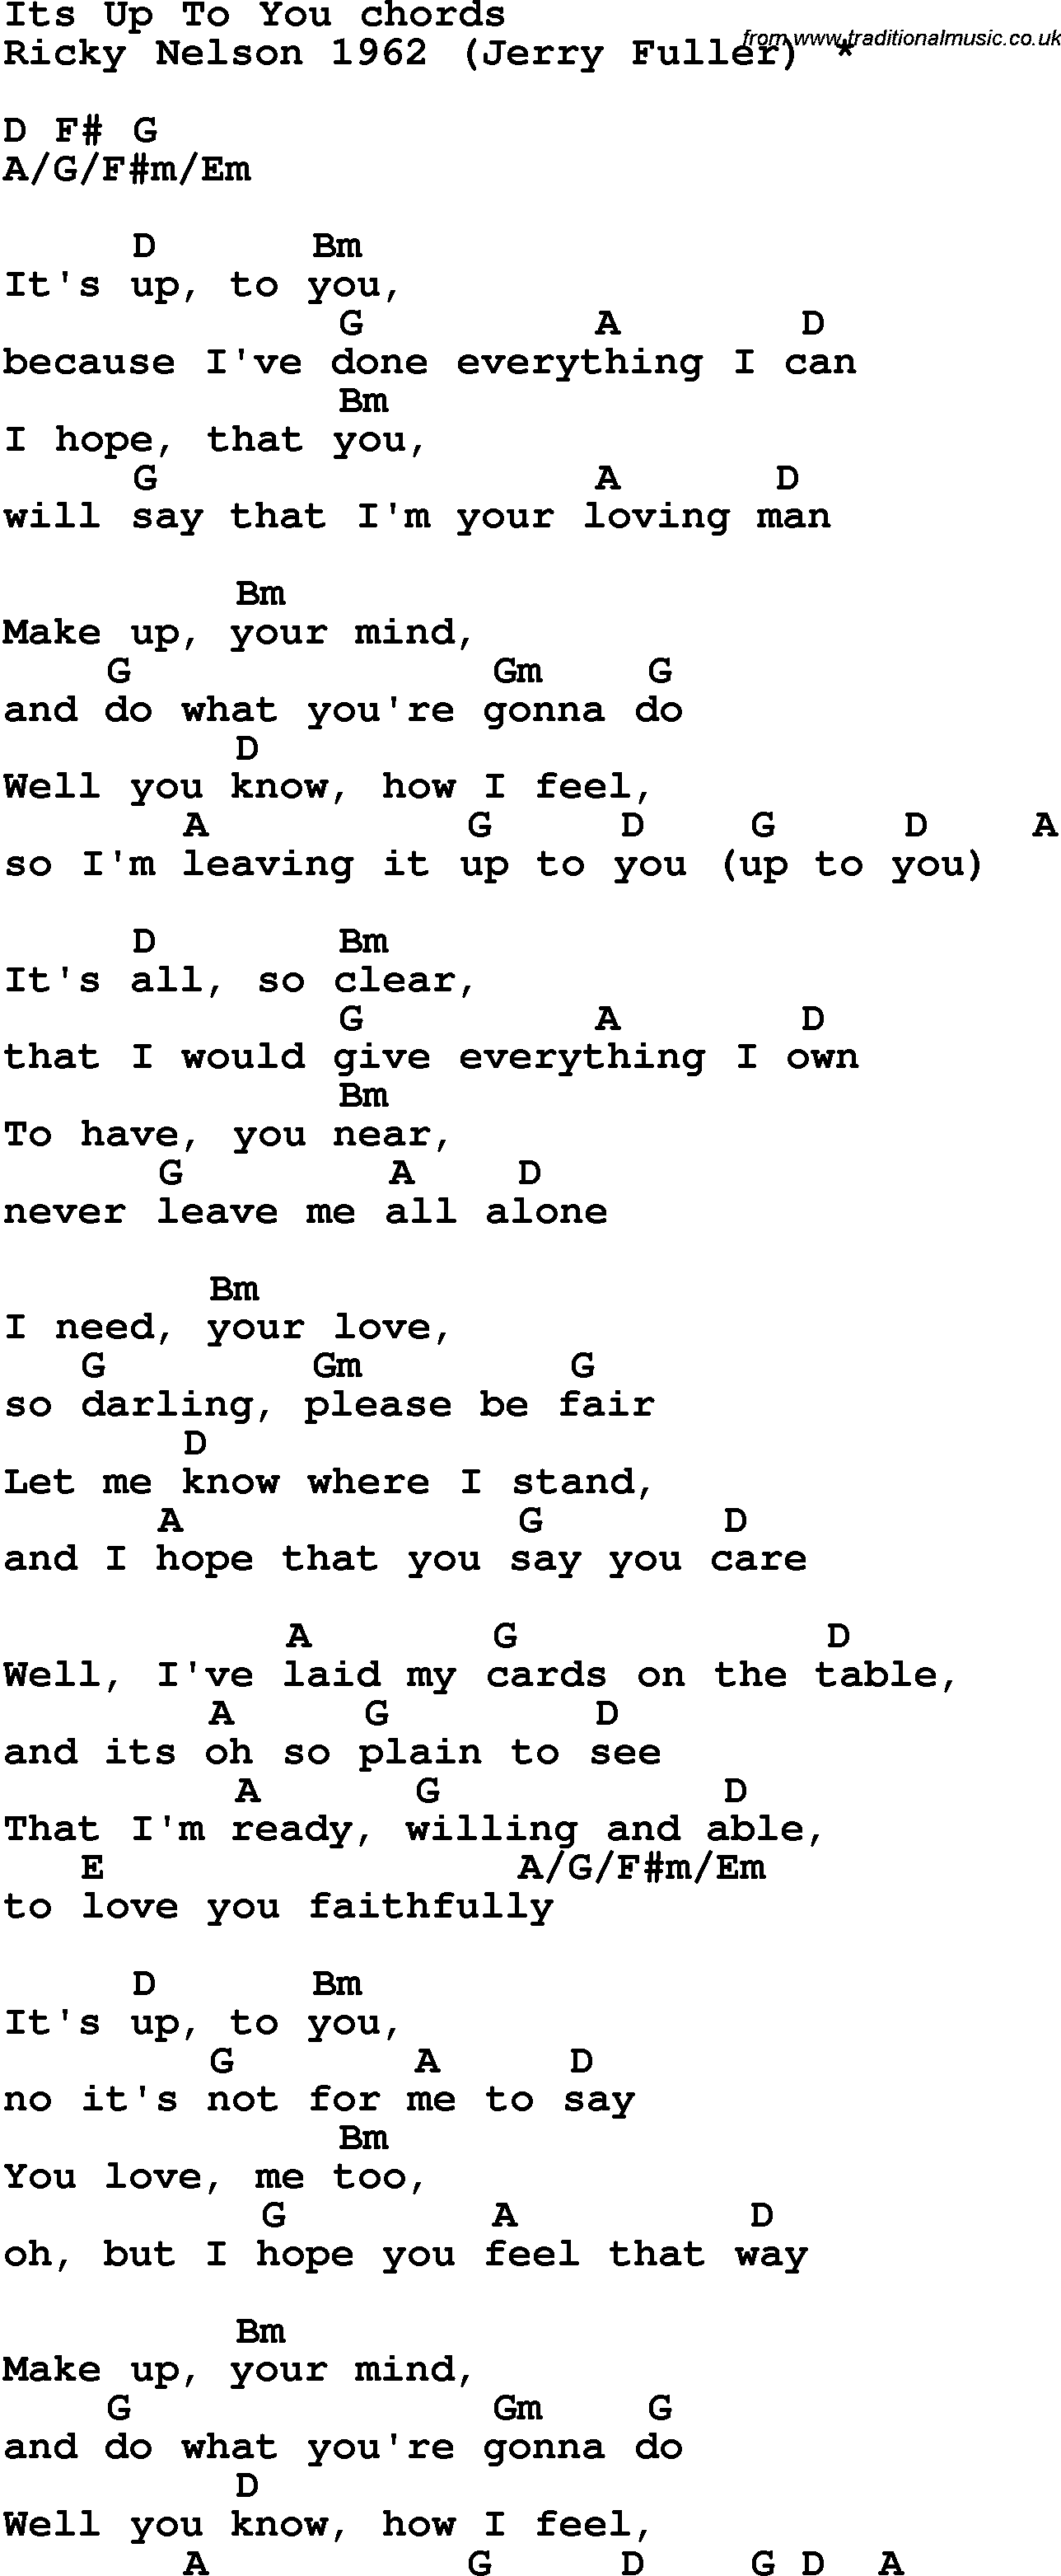 Song Lyrics with guitar chords for It's Up To You